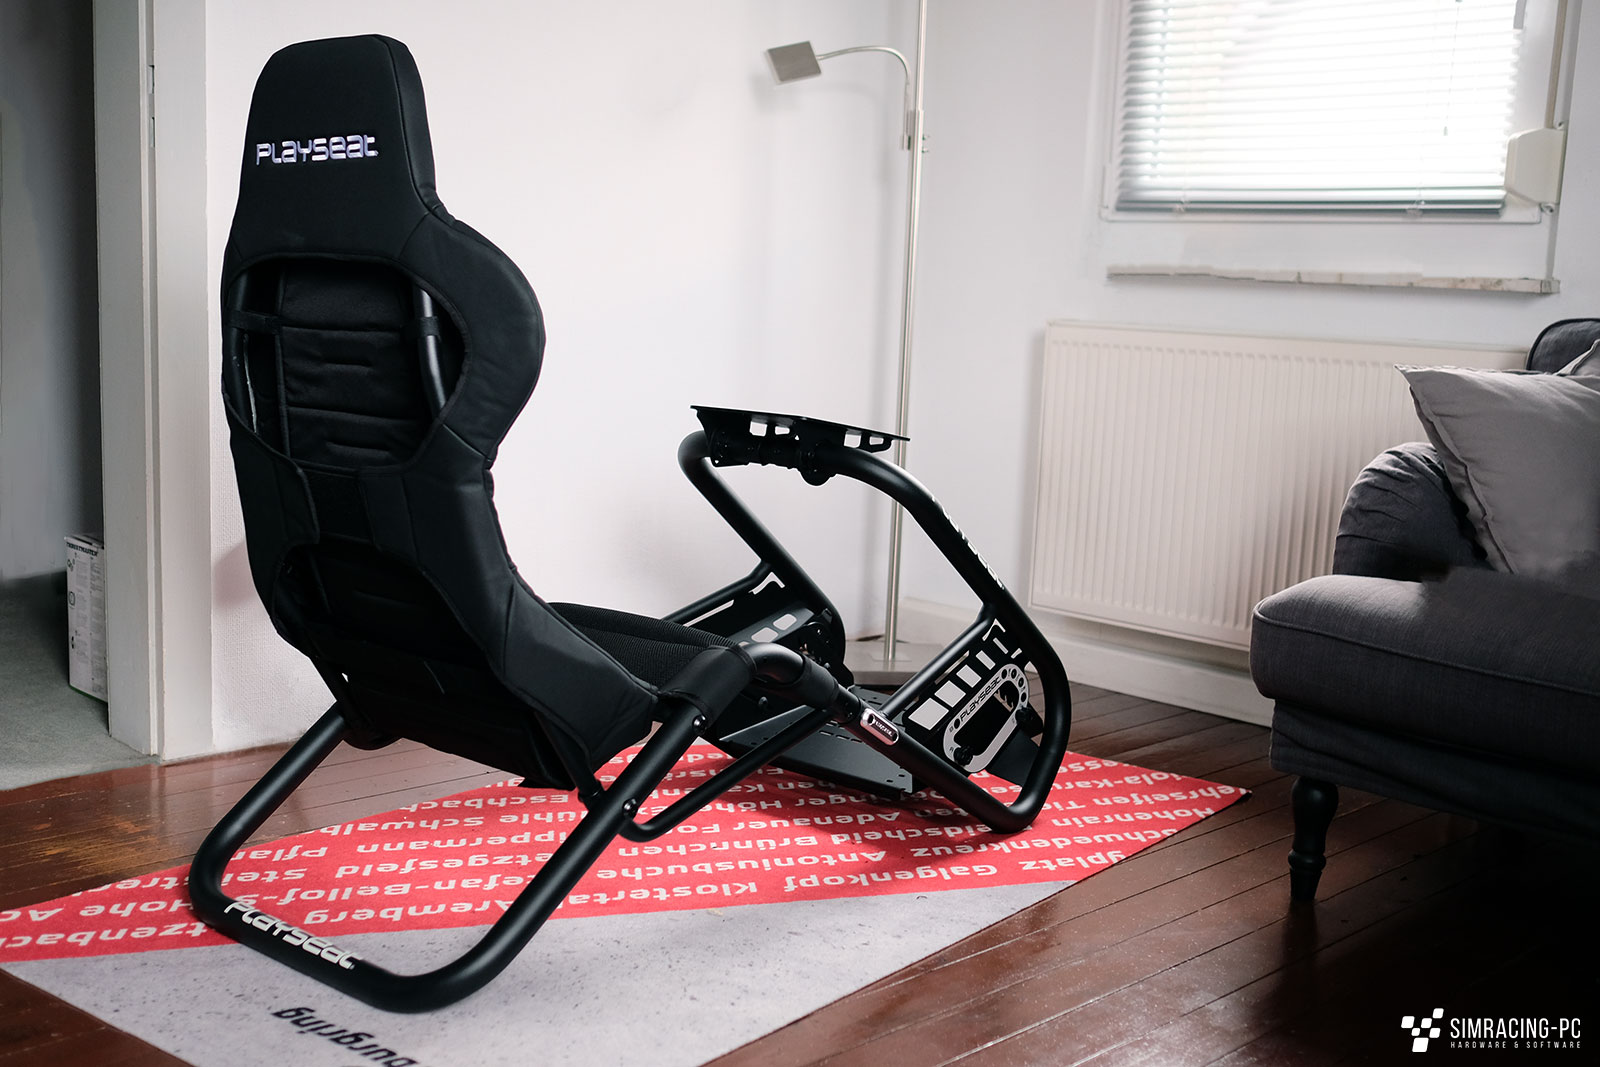 PLAYSEAT® TROPHY RED